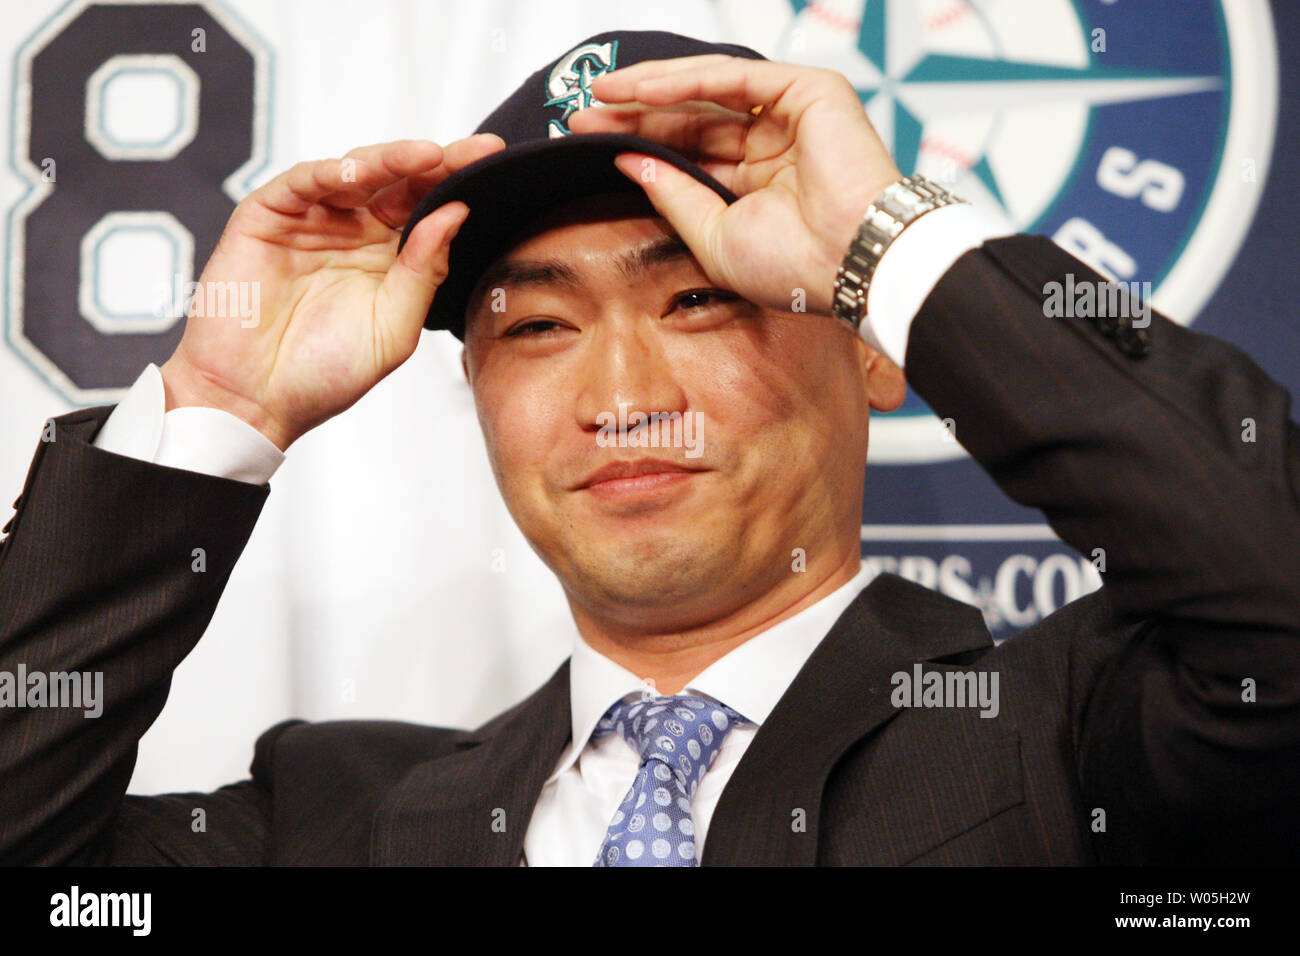 Norichika AokI  tries on his  Mariners Cap during introduction to the press. The Mariners have signed free agent outfielder Norichika AokI to a one-year contract with a vesting mutual option for the 2017 season at SAFECO Field on December 3, 2015 in Seattle.    Photo by Jim Bryant/UPI Stock Photo